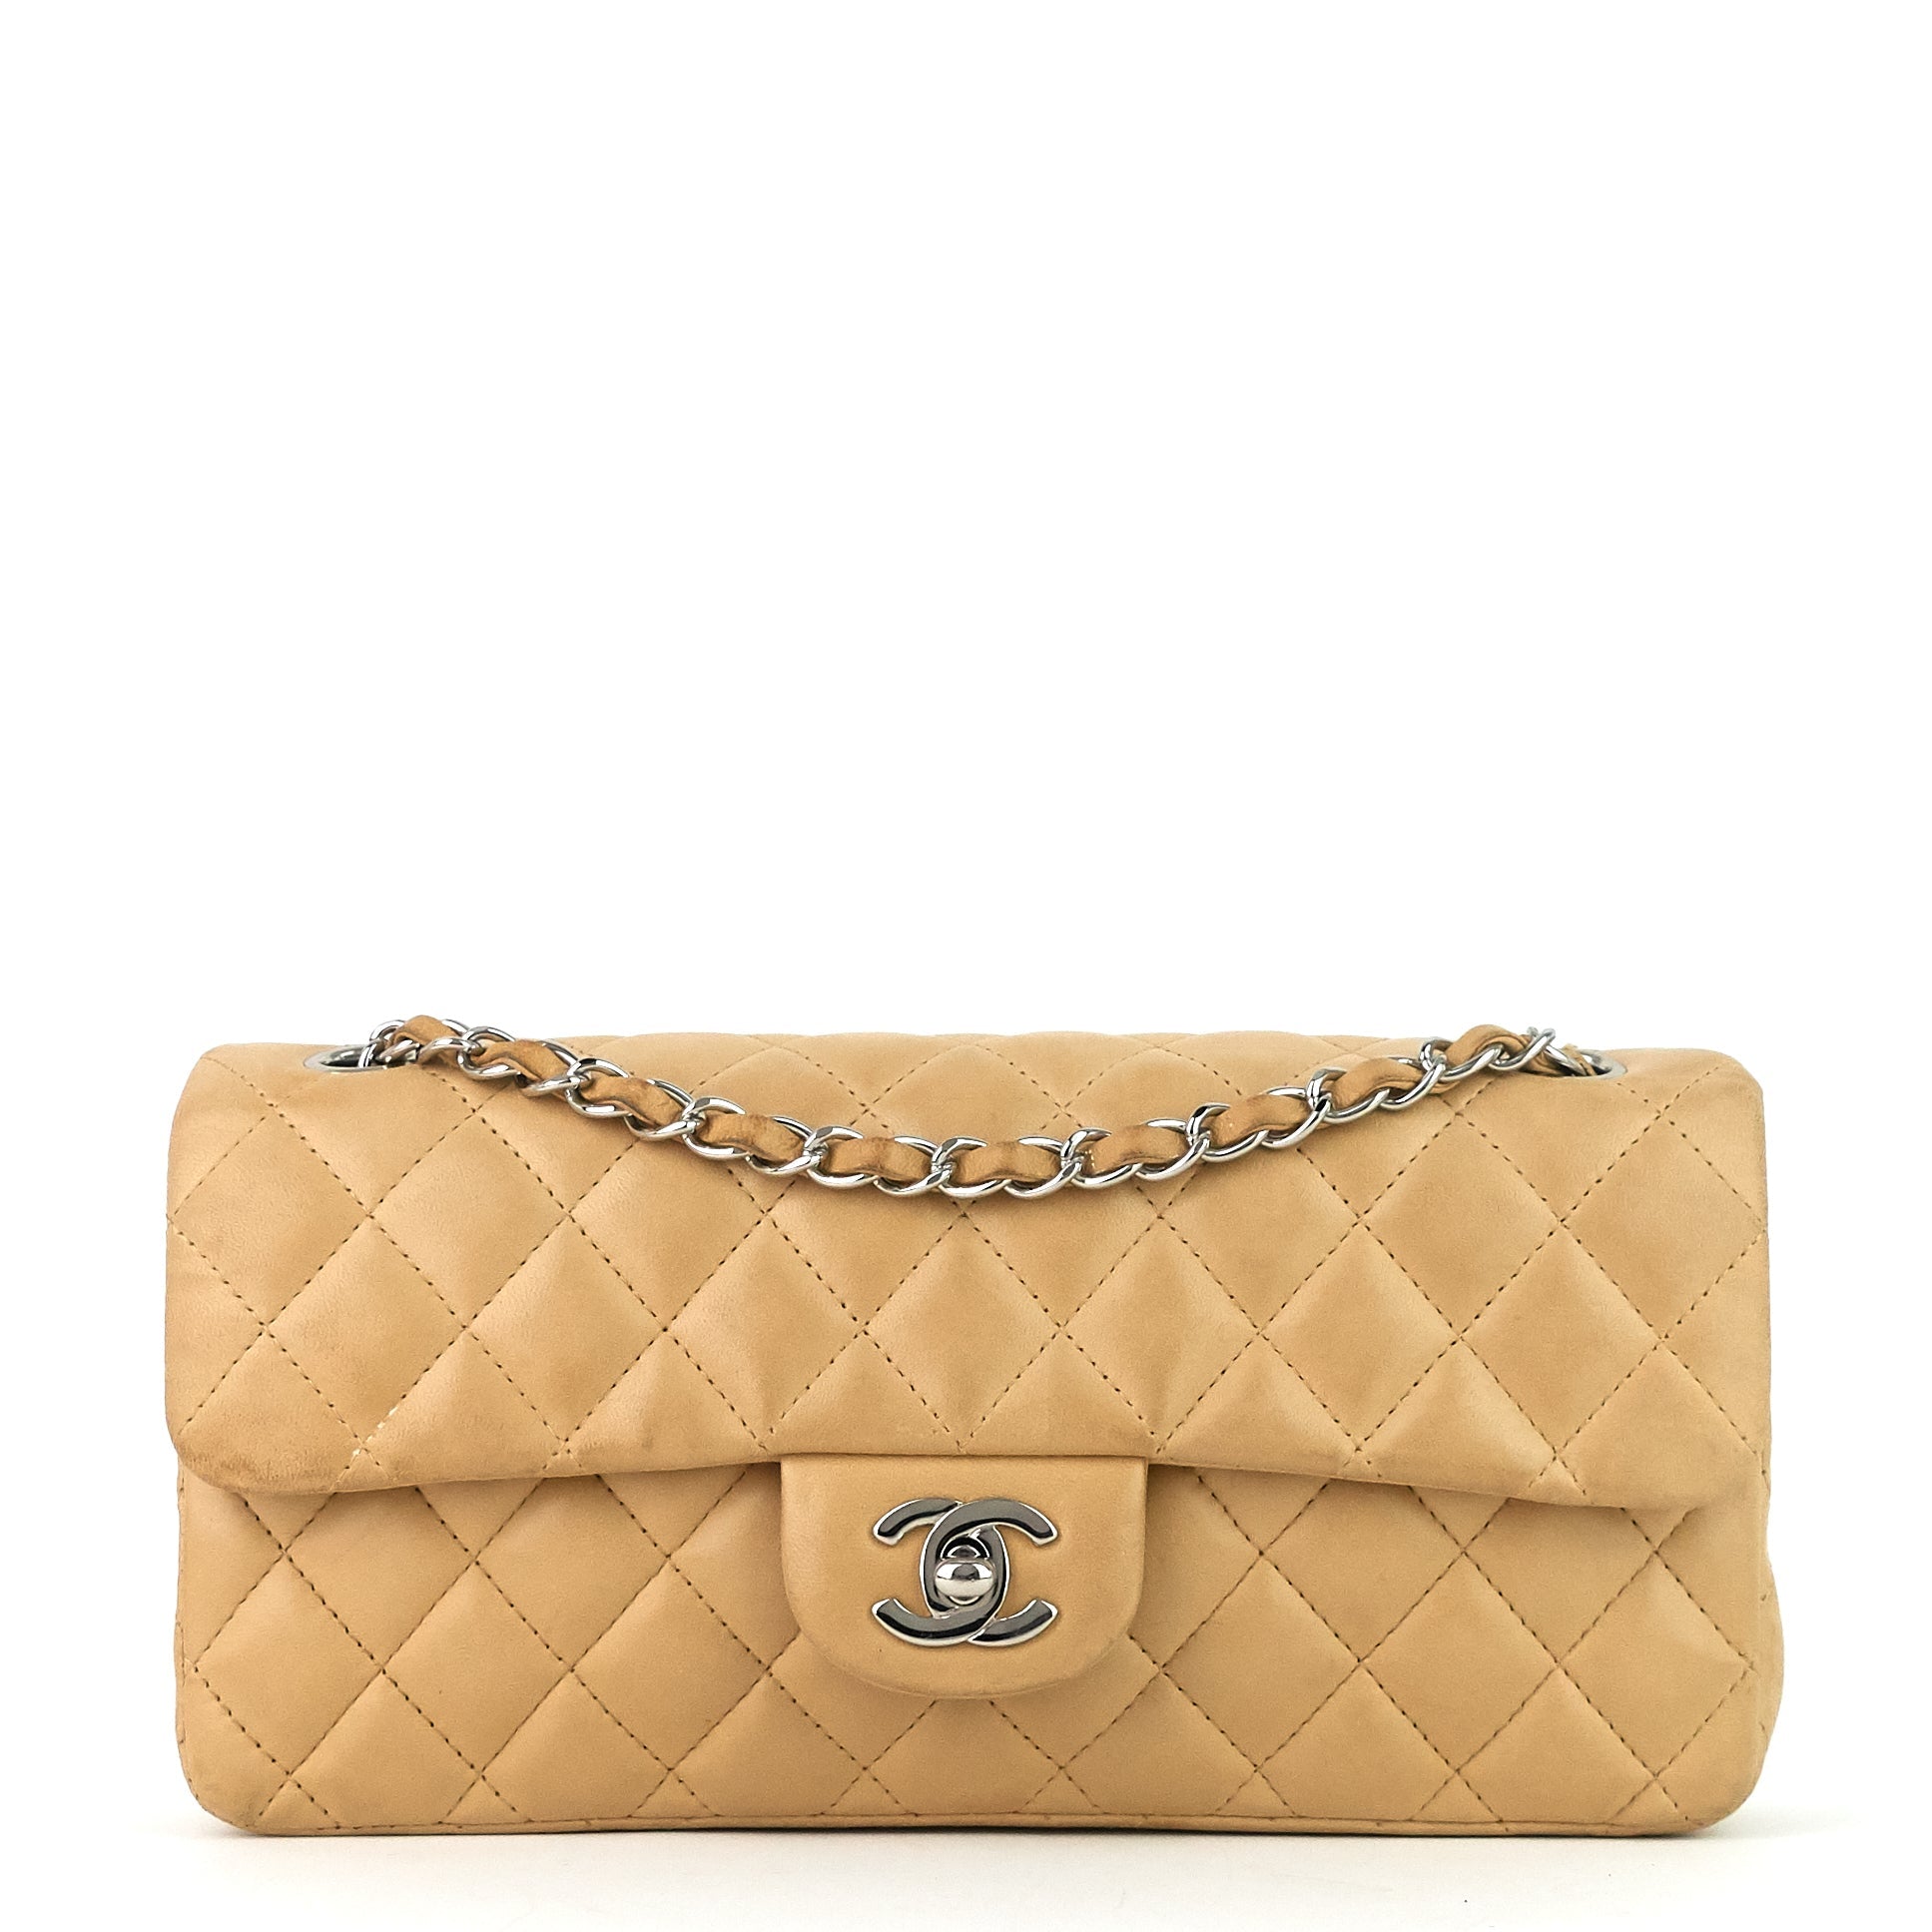 Chanel East West Quilted Lambskin Flap Bag